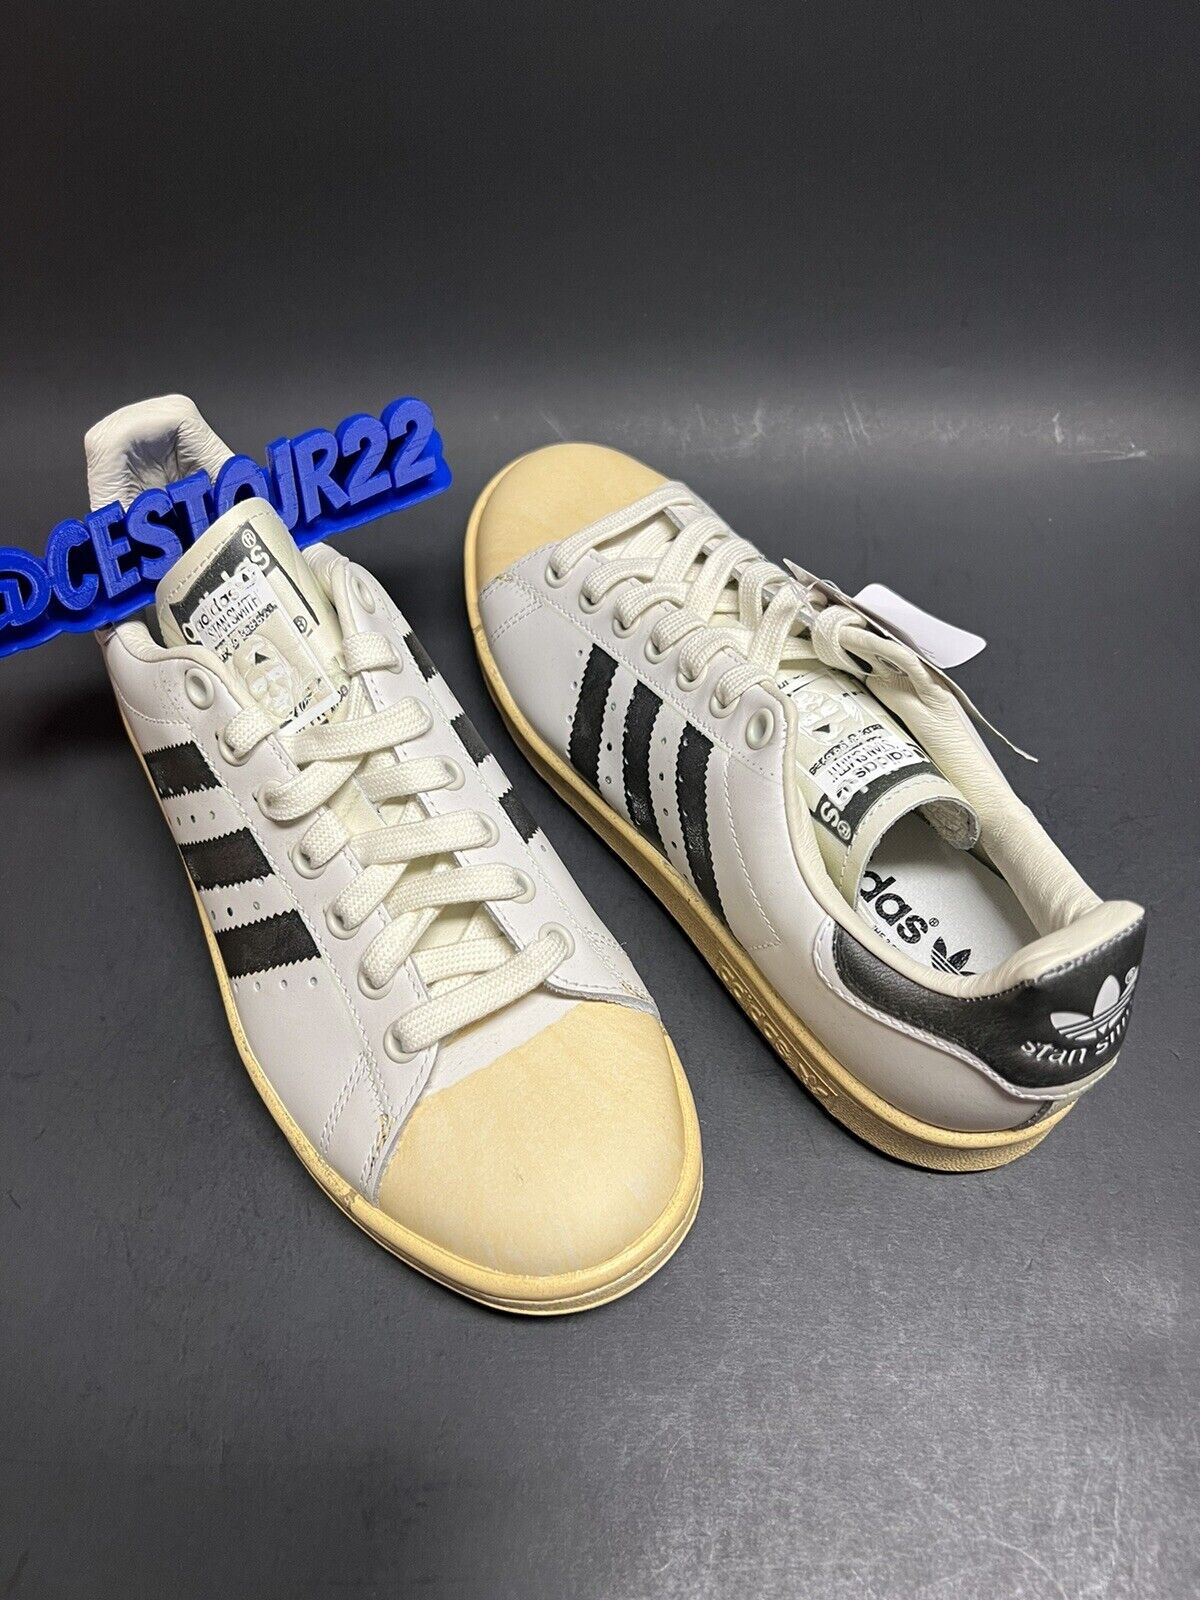 ADIDAS STAN SMITH SUPERSTAN [FW6095] AGED DISTRESSED LEATHER SUPERSTAR SZ 7